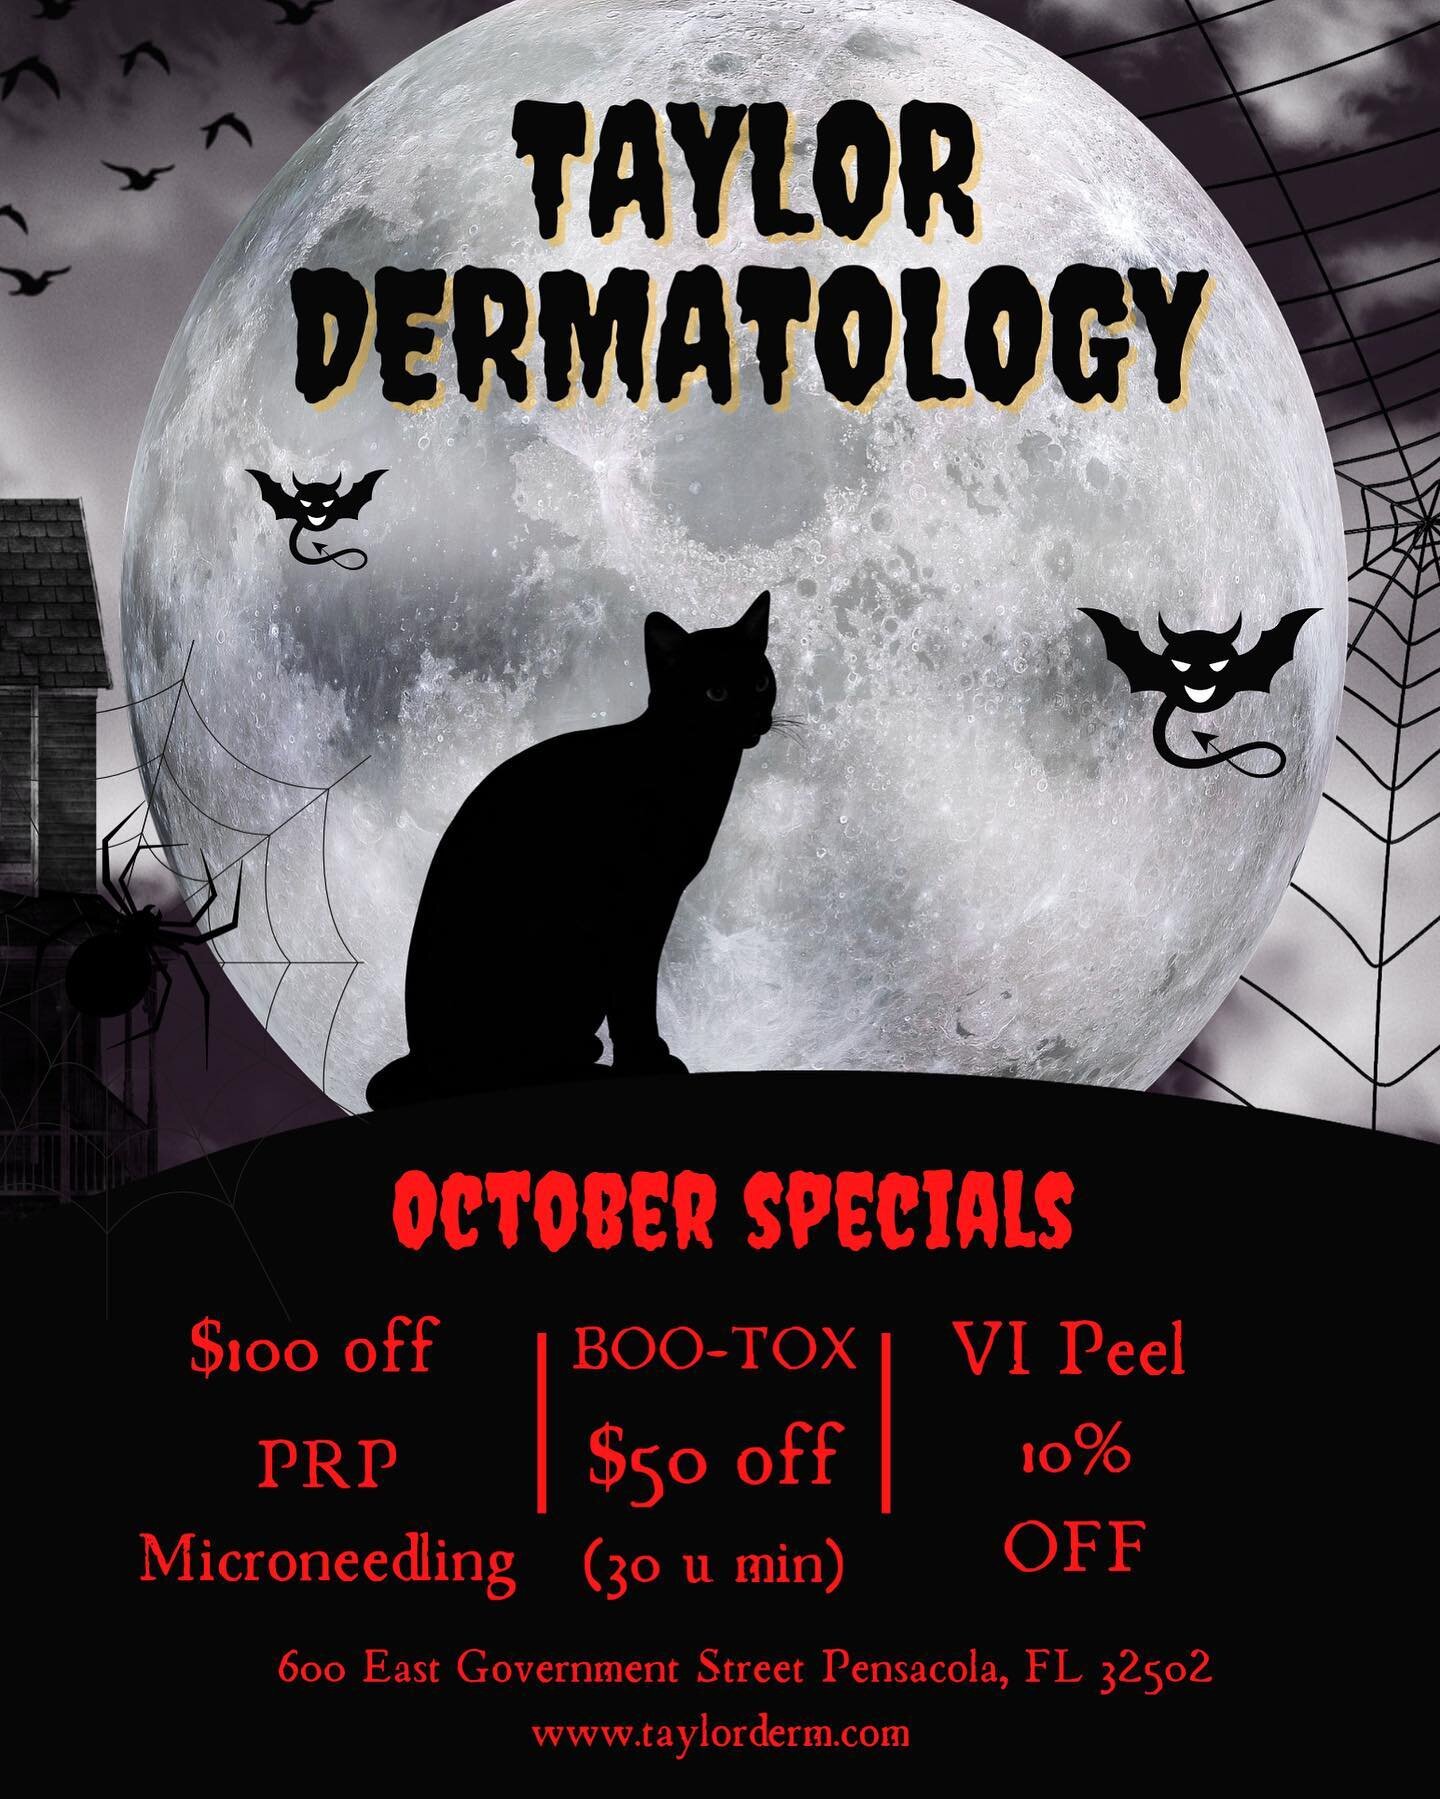 It&rsquo;s officially October! 🕷 Dr. Taylor&rsquo;s favorite month, so we&rsquo;re bringing out our best specials yet. 🙌🏻

🩸 PRP Facials are $100 off this month only
💉 Boo-tox is $50 off (30u min)
💆🏻&zwj;♀️ Vi Peels are 10% off 

Book online w